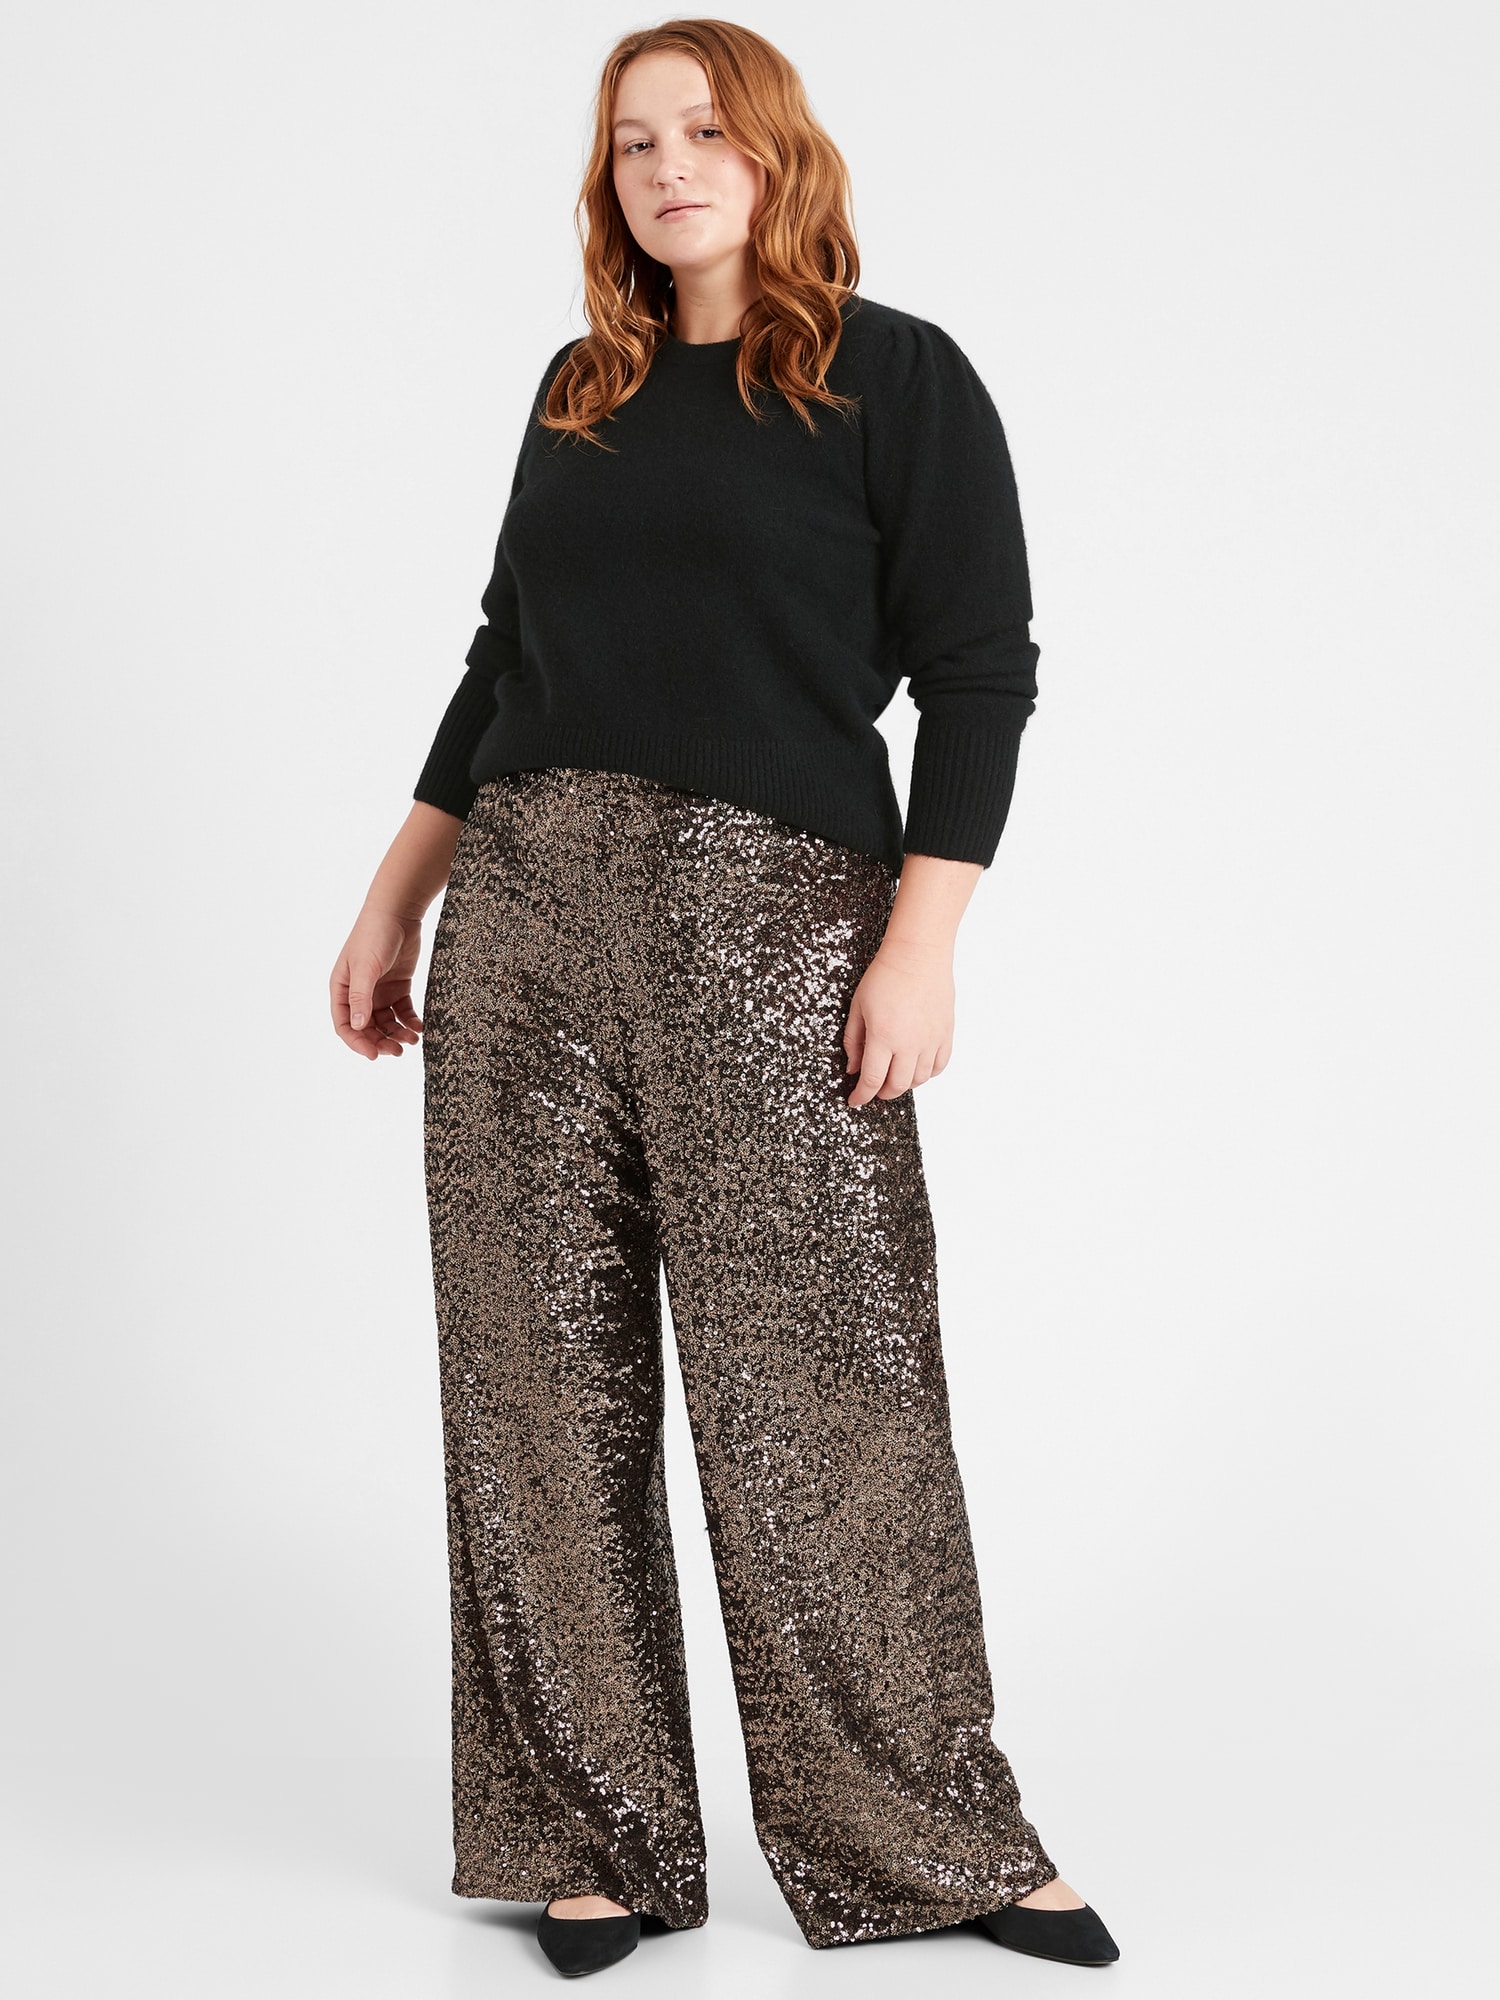 EVALESS Womens Sequin Pants Sparkly Glitter High Waisted Wide Leg